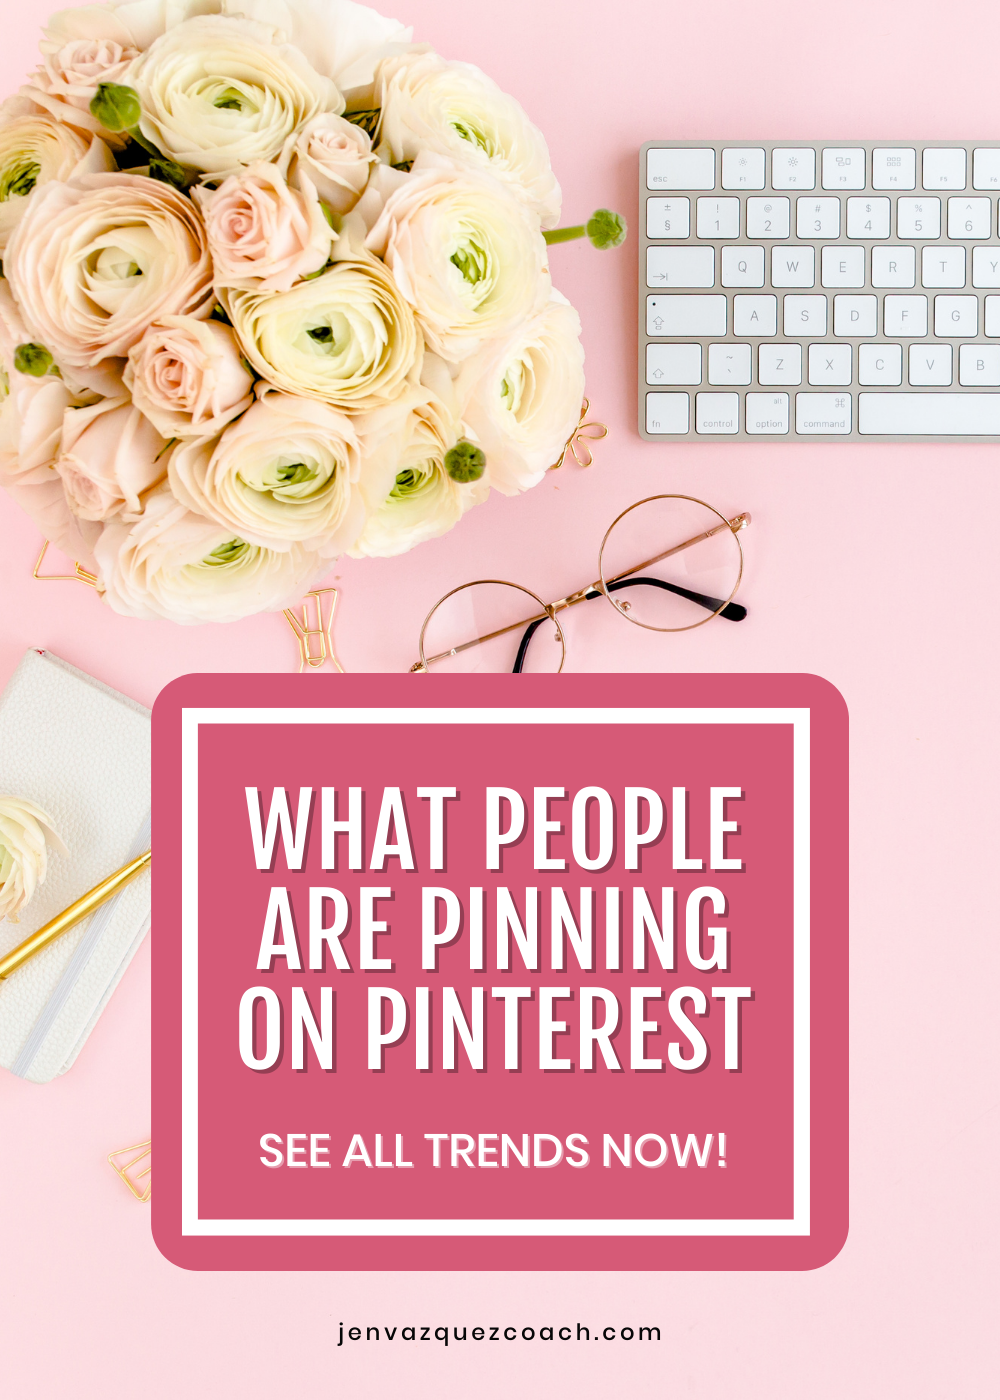 What's Trending Now on Pinterest | Pinterest Predicts Weekly 11-11-22